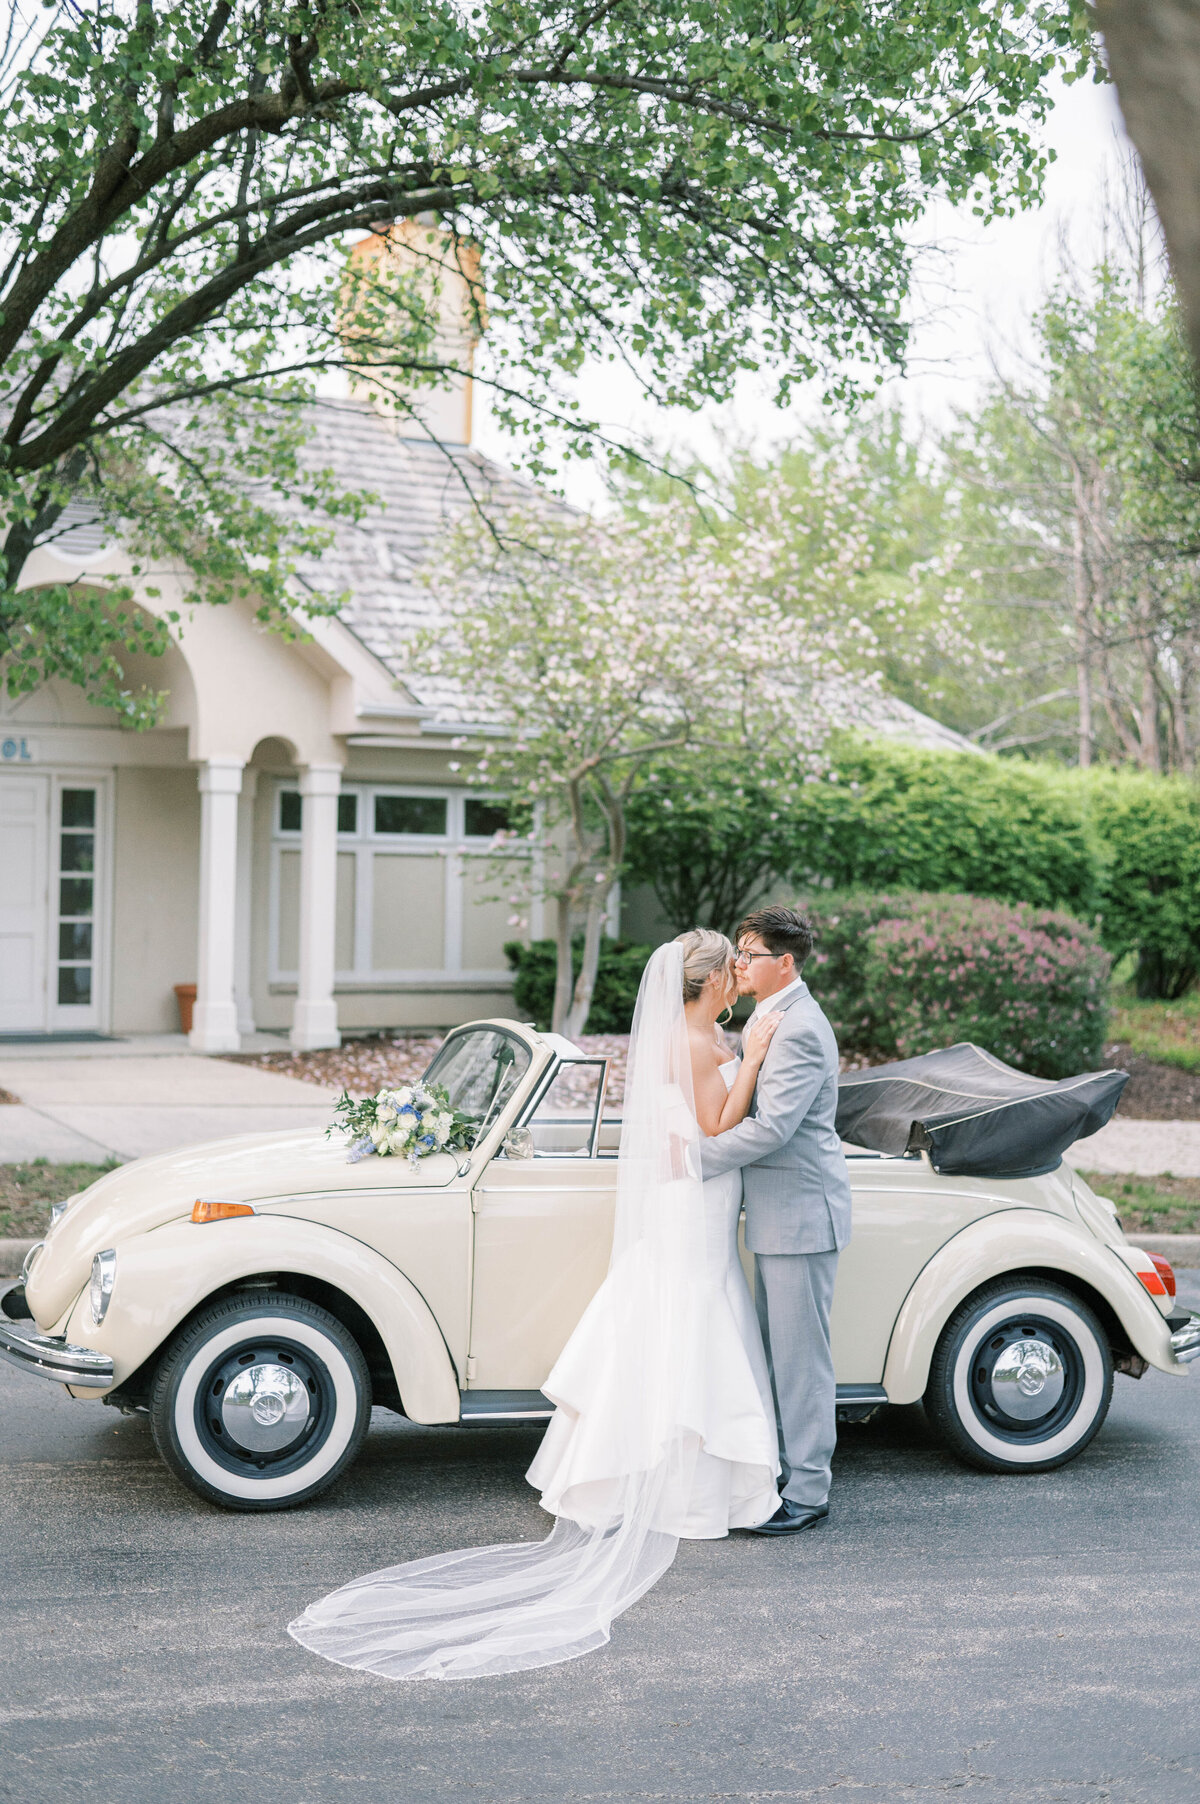 Bride and groom pose in front of vintage car at midwest wedding